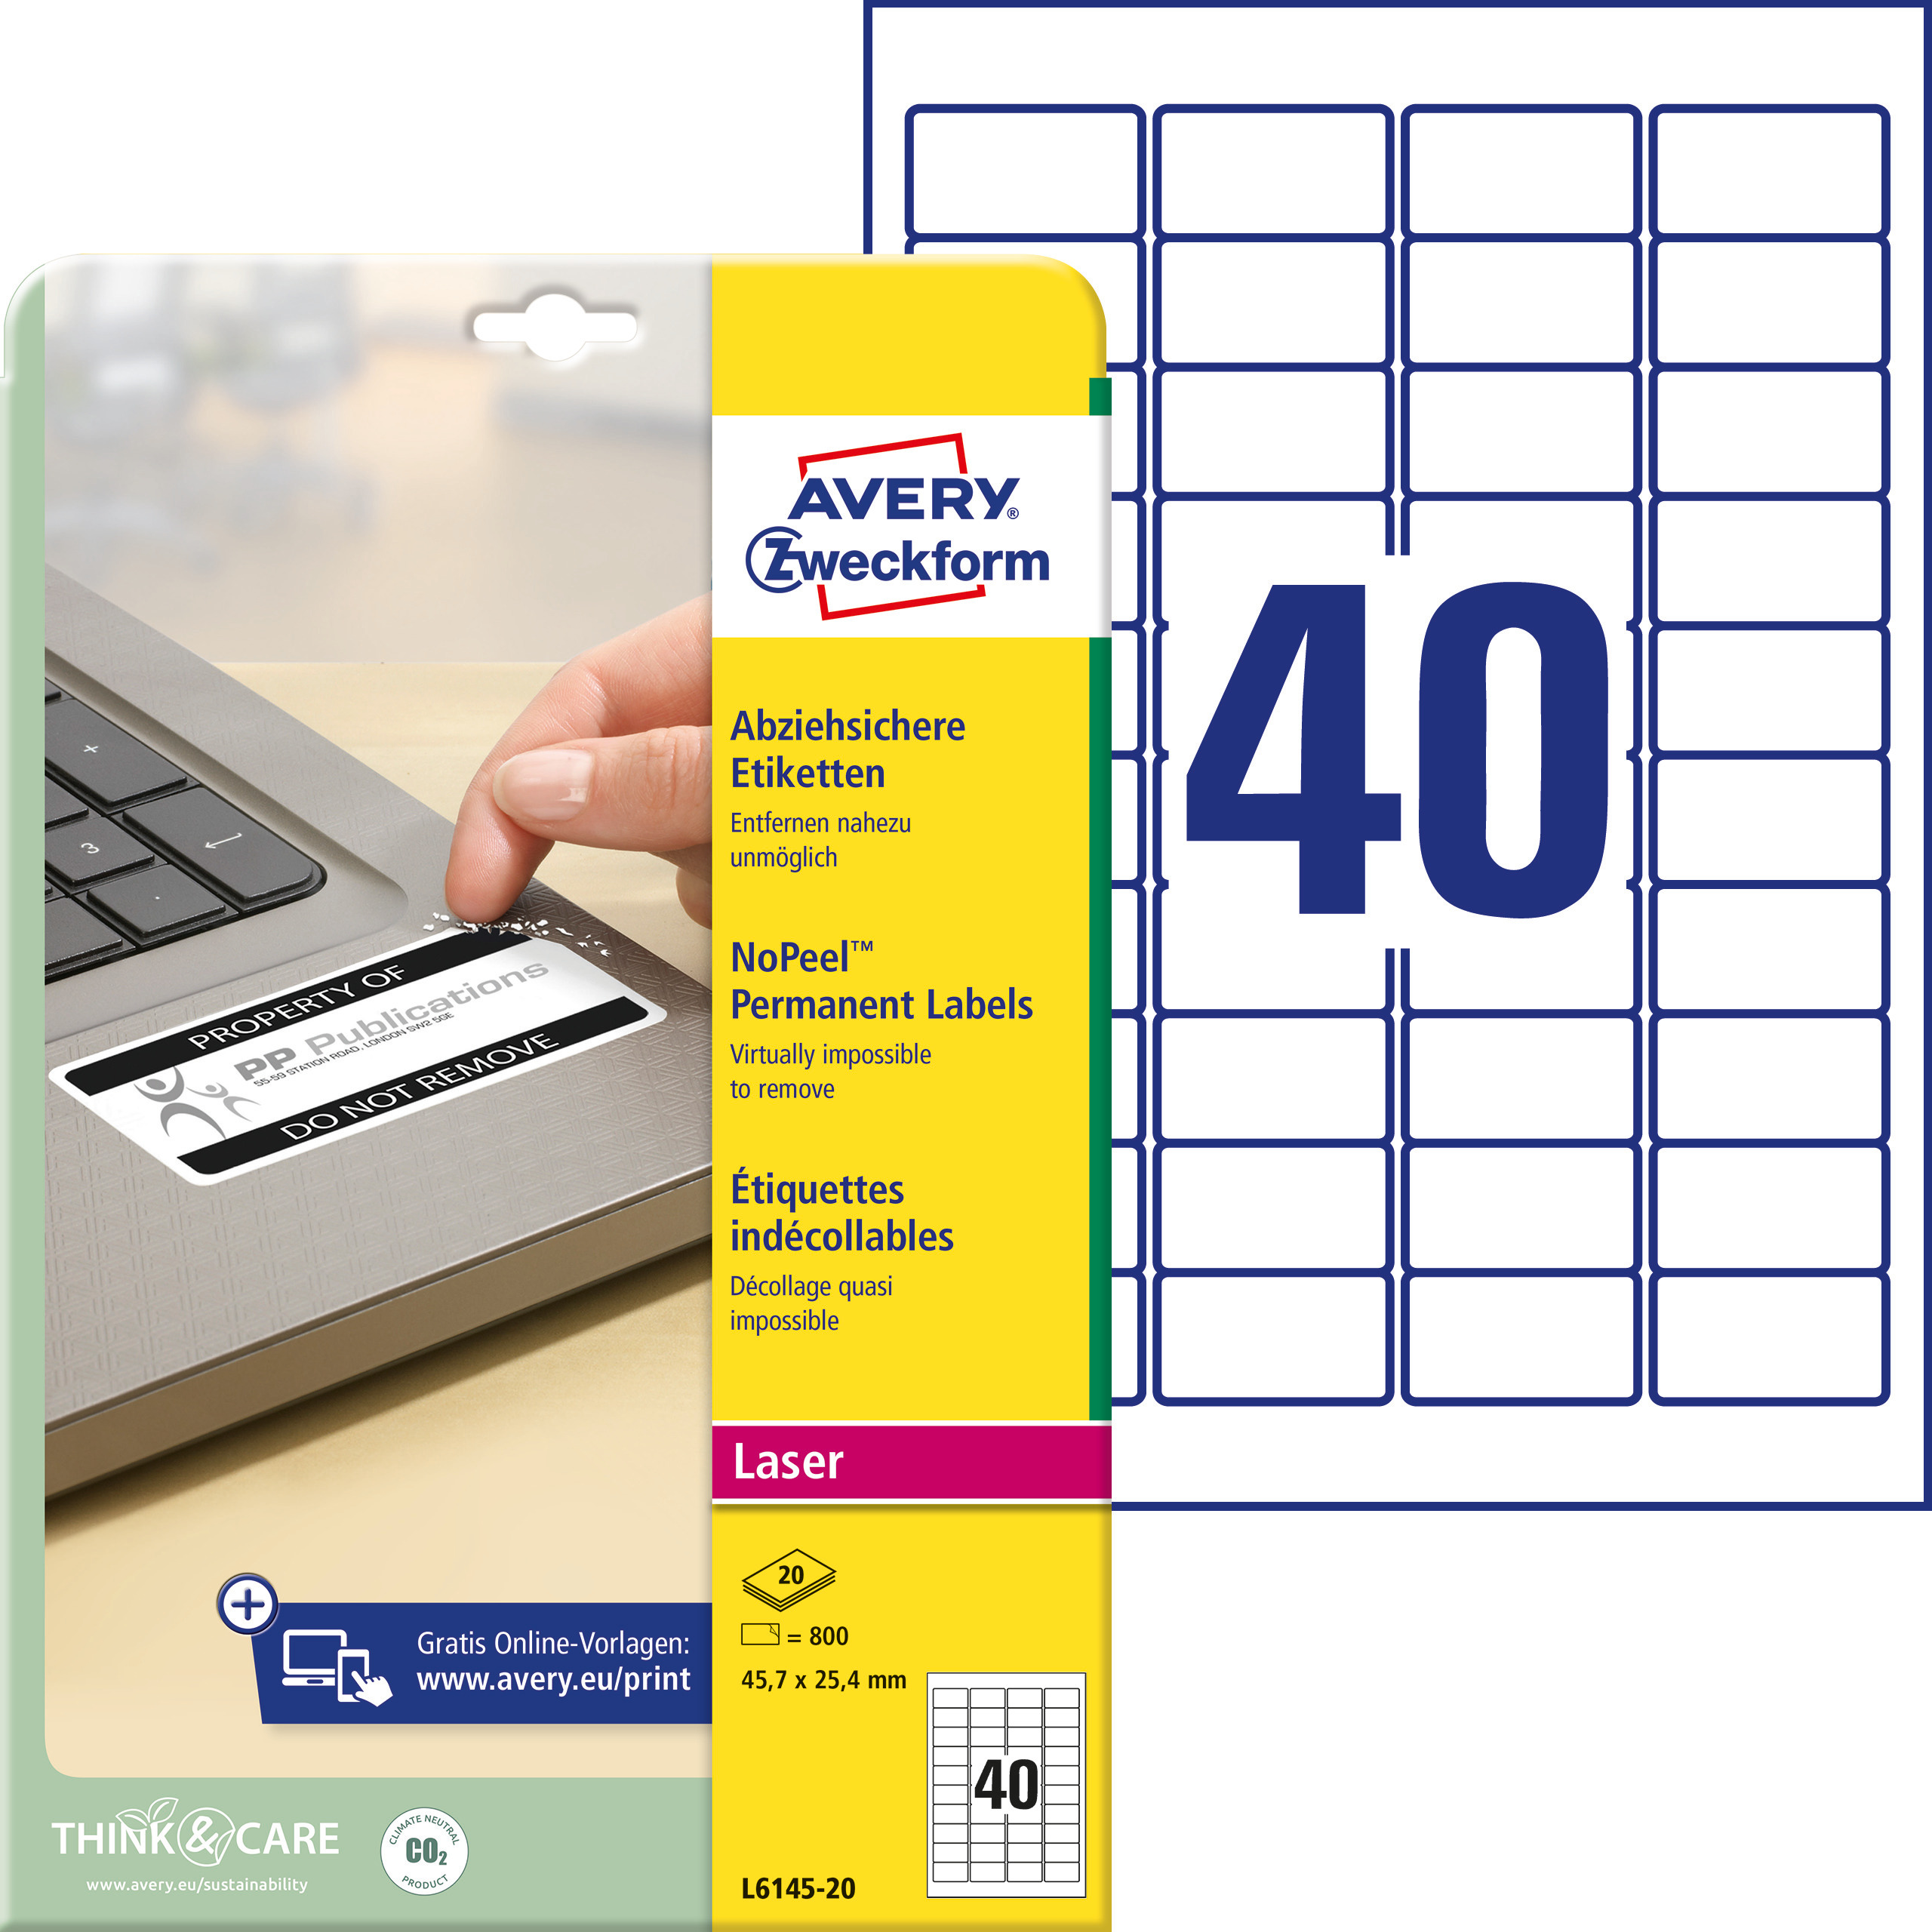 Self-adhesive labels Nopeel acrylic film for monochrome laser printers - 40 labels per sheet